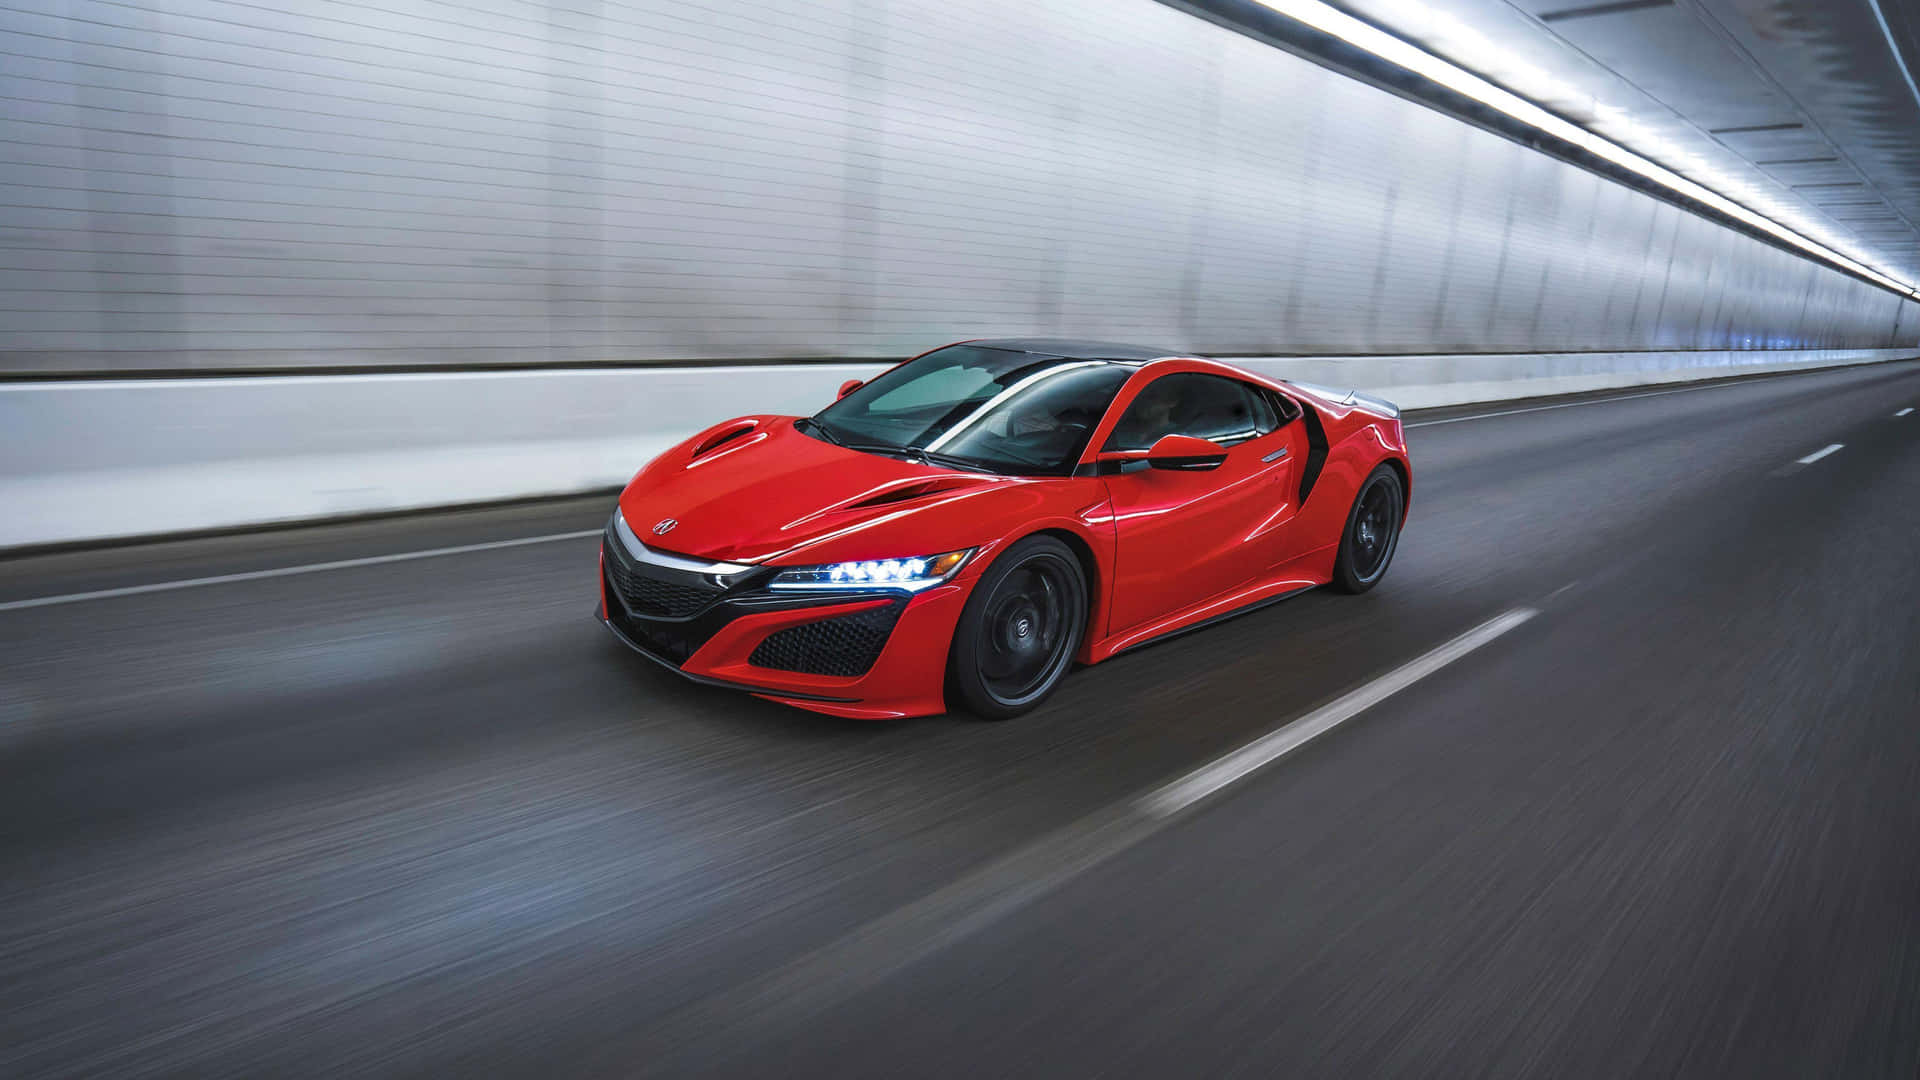 Caption: Sleek Acura NSX with Vibrant Red Exterior Wallpaper